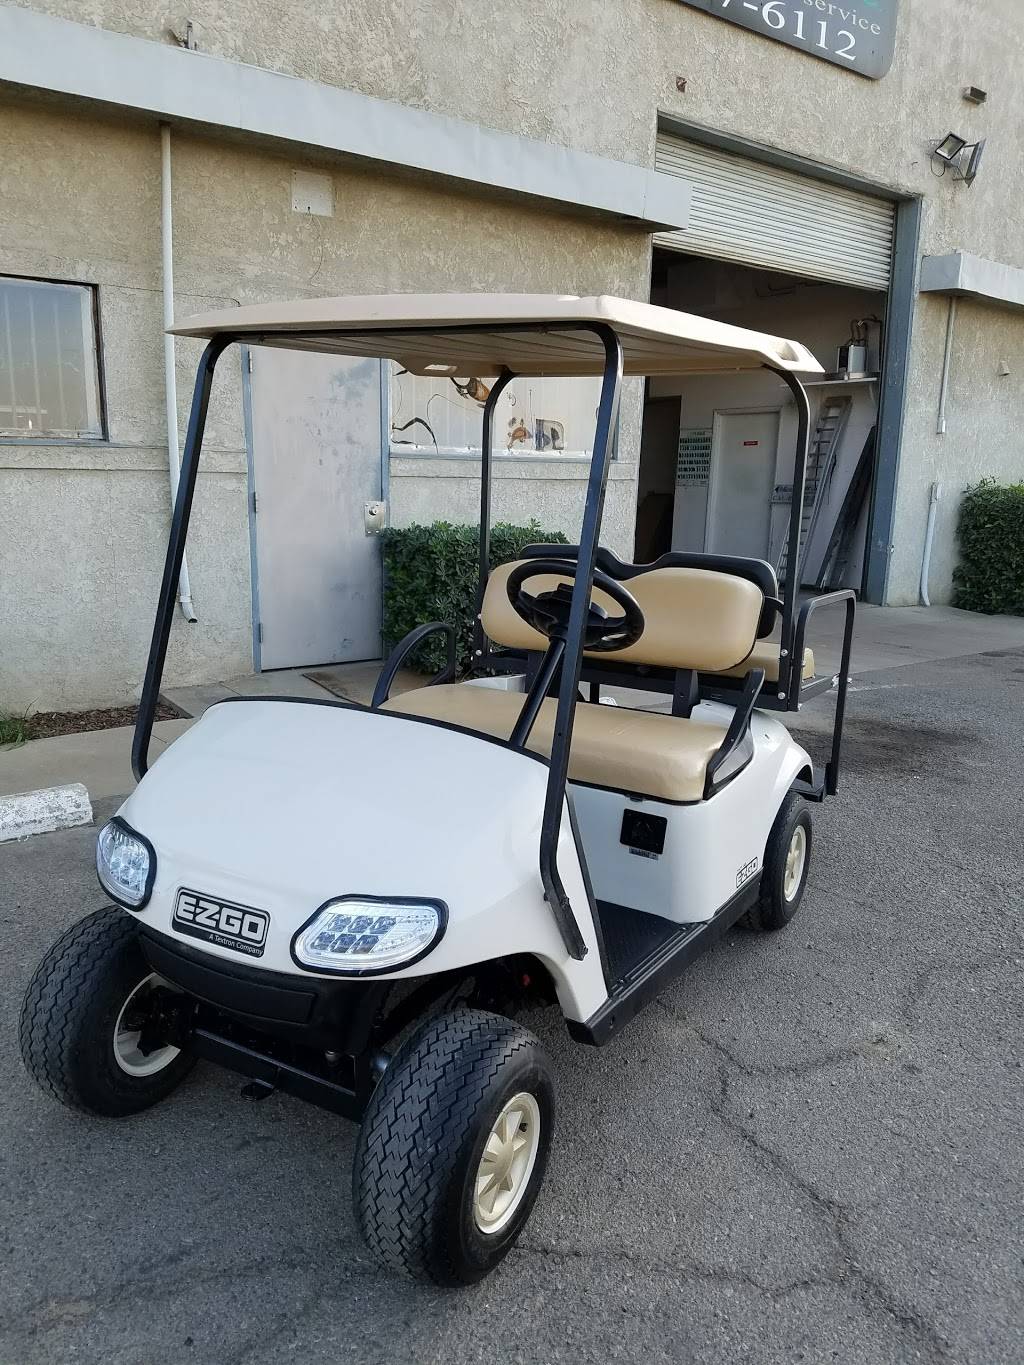 Tolleson Golf Cars Inc | 3363 S Golden State Blvd, Fresno, CA 93725 | Phone: (559) 497-6112